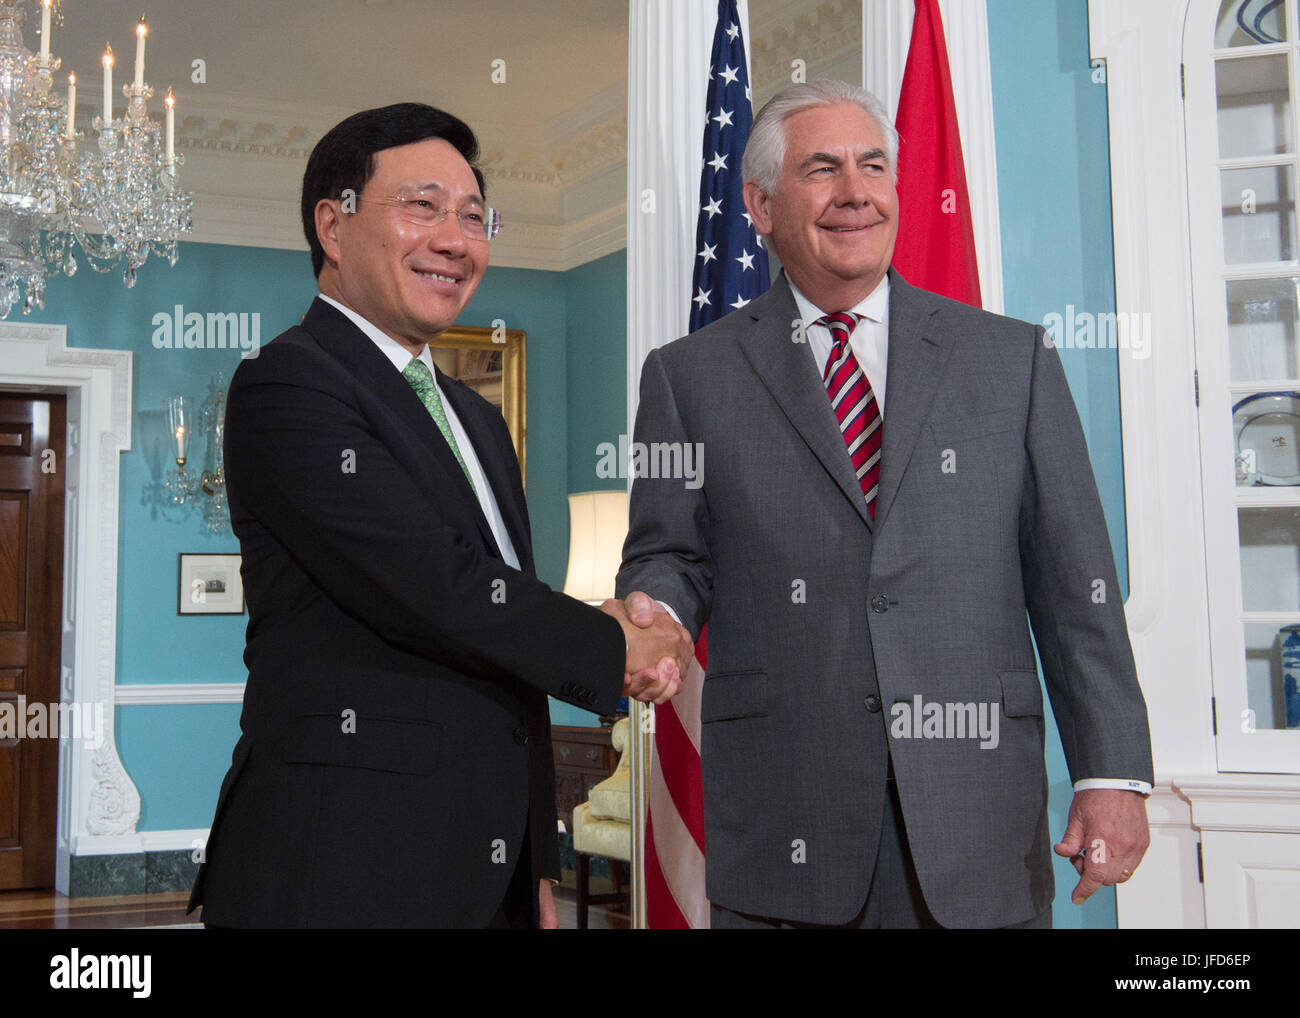 U.S. Secretary of State Rex Tillerson and  Vietnamese Deputy Prime Minister and Foreign Minister Pham Binh Minh shake hands before their bilateral meeting at the U.S. Department of State in Washington, D.C., on April 20, 2017. Stock Photo